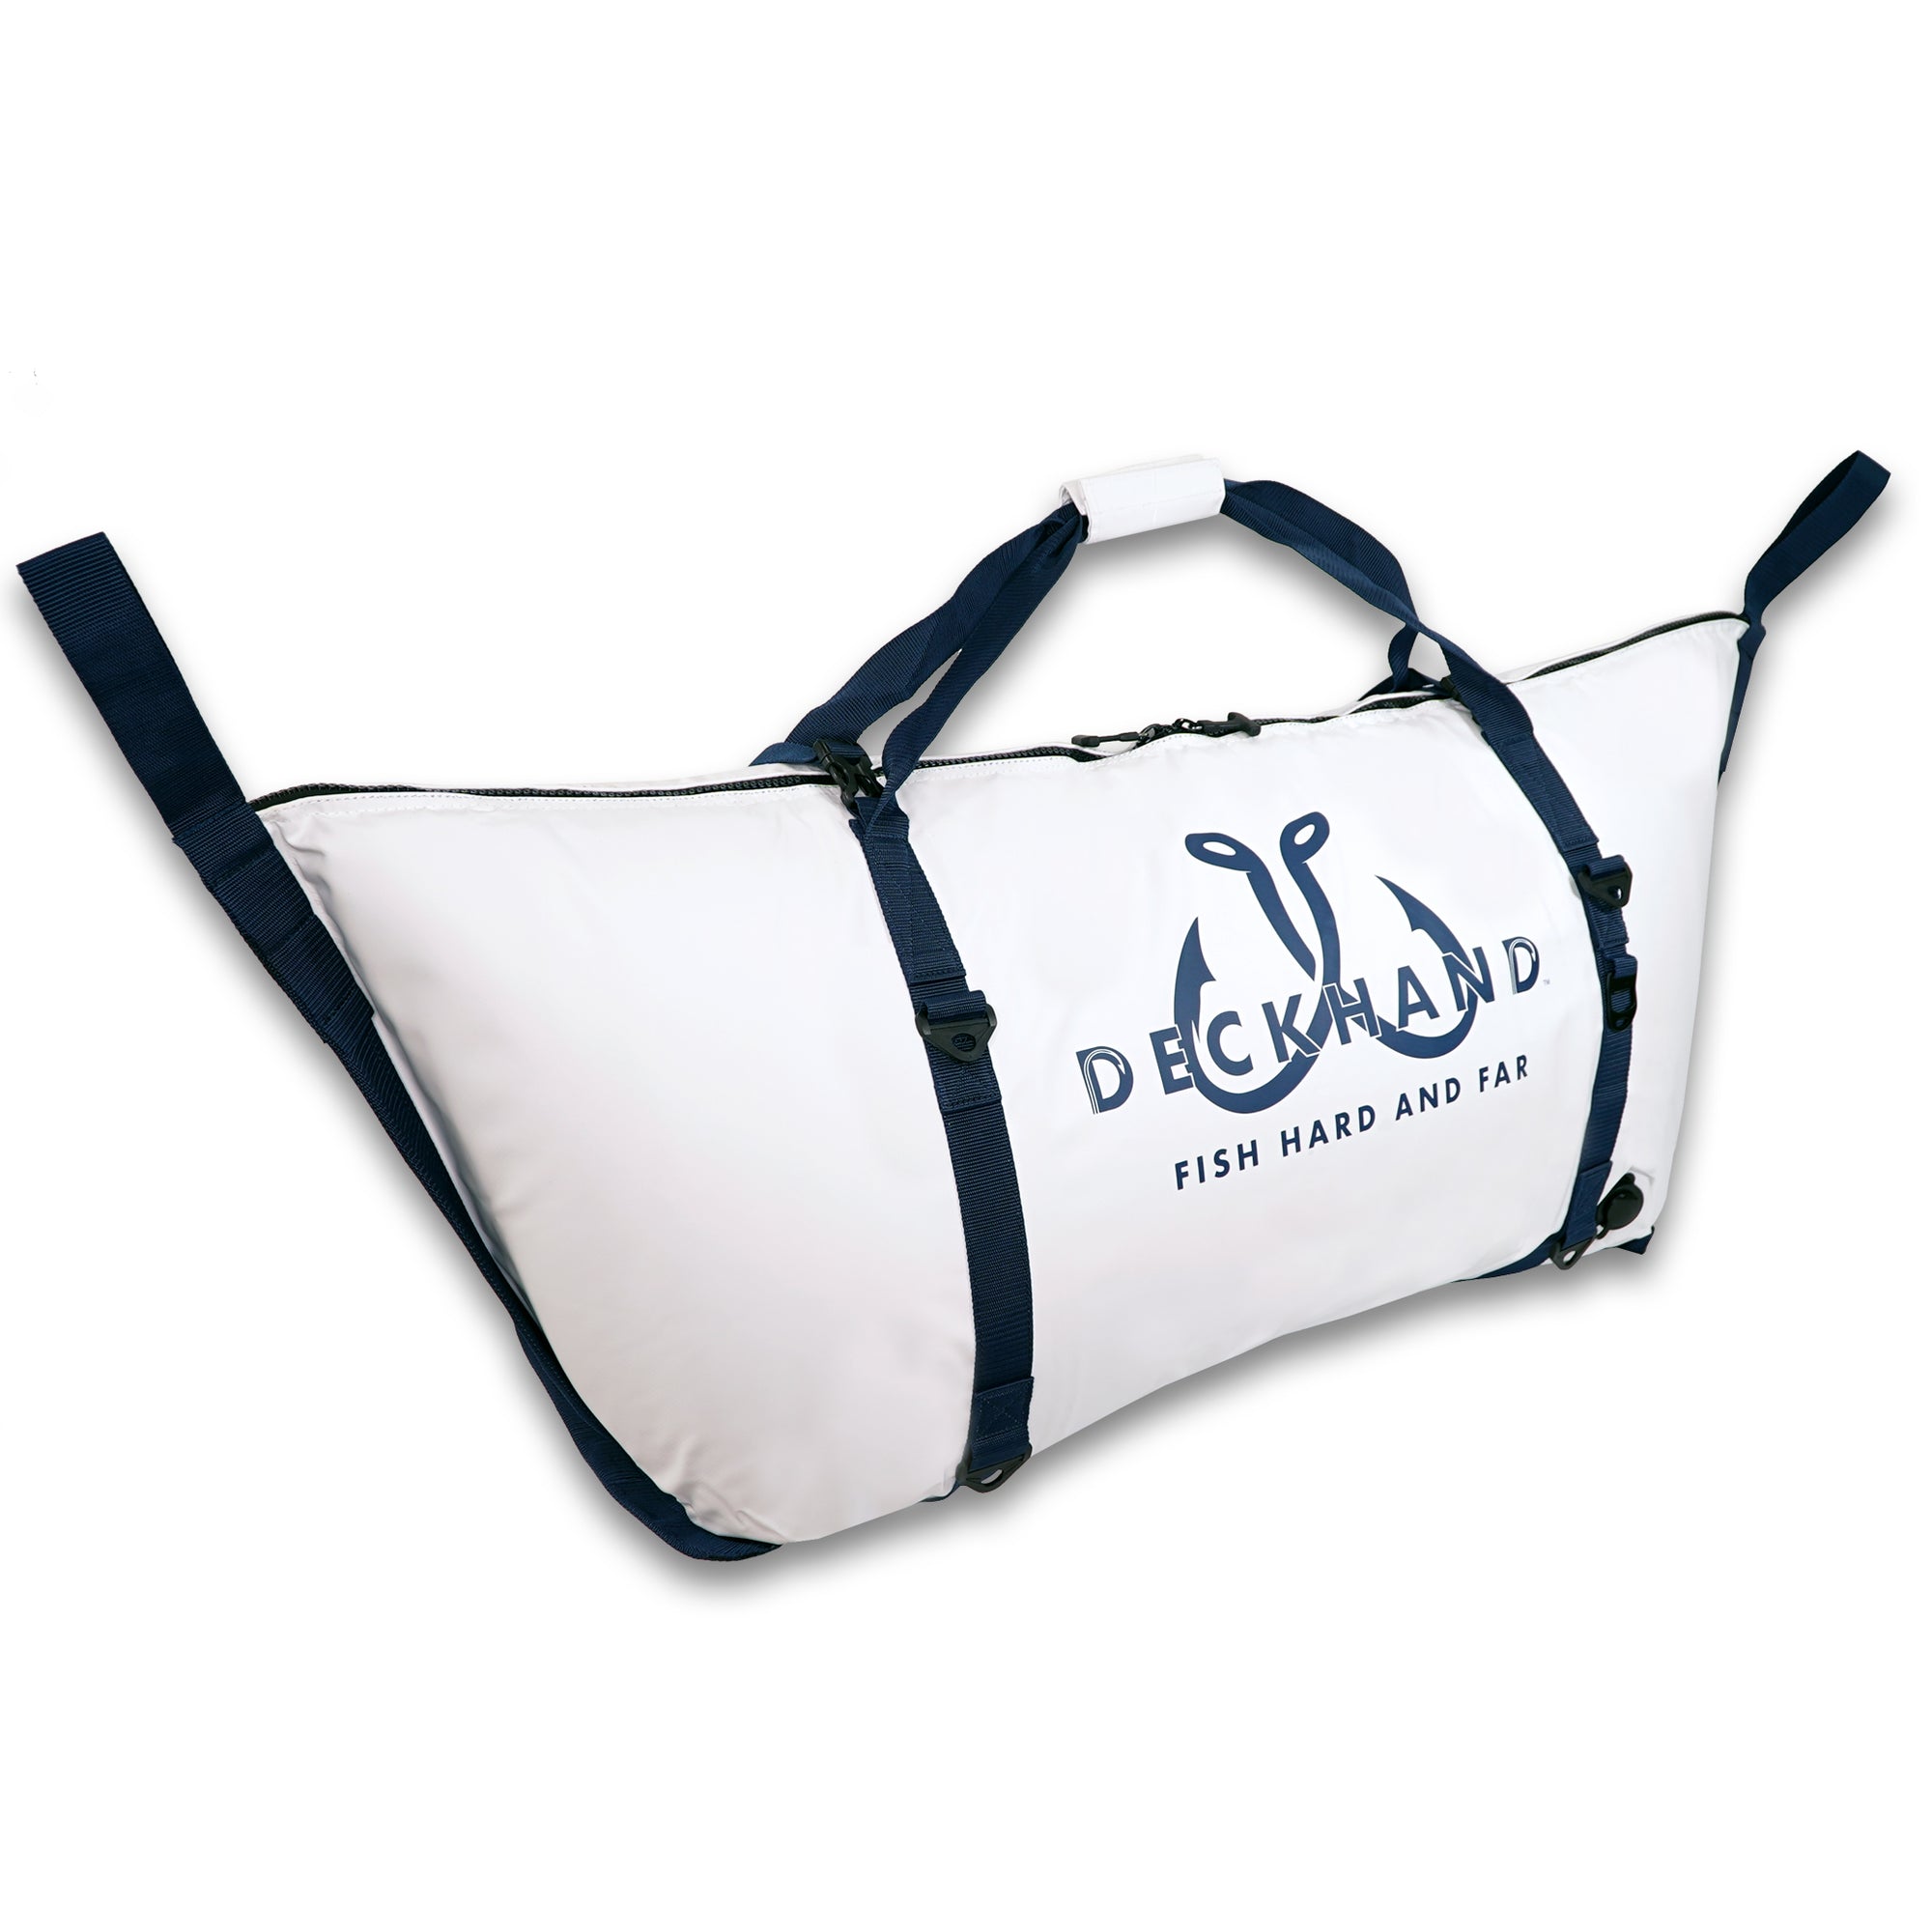 Deckhand Sports: Our Bags Don't Leak! Strongest Built Kill Bags & Dry